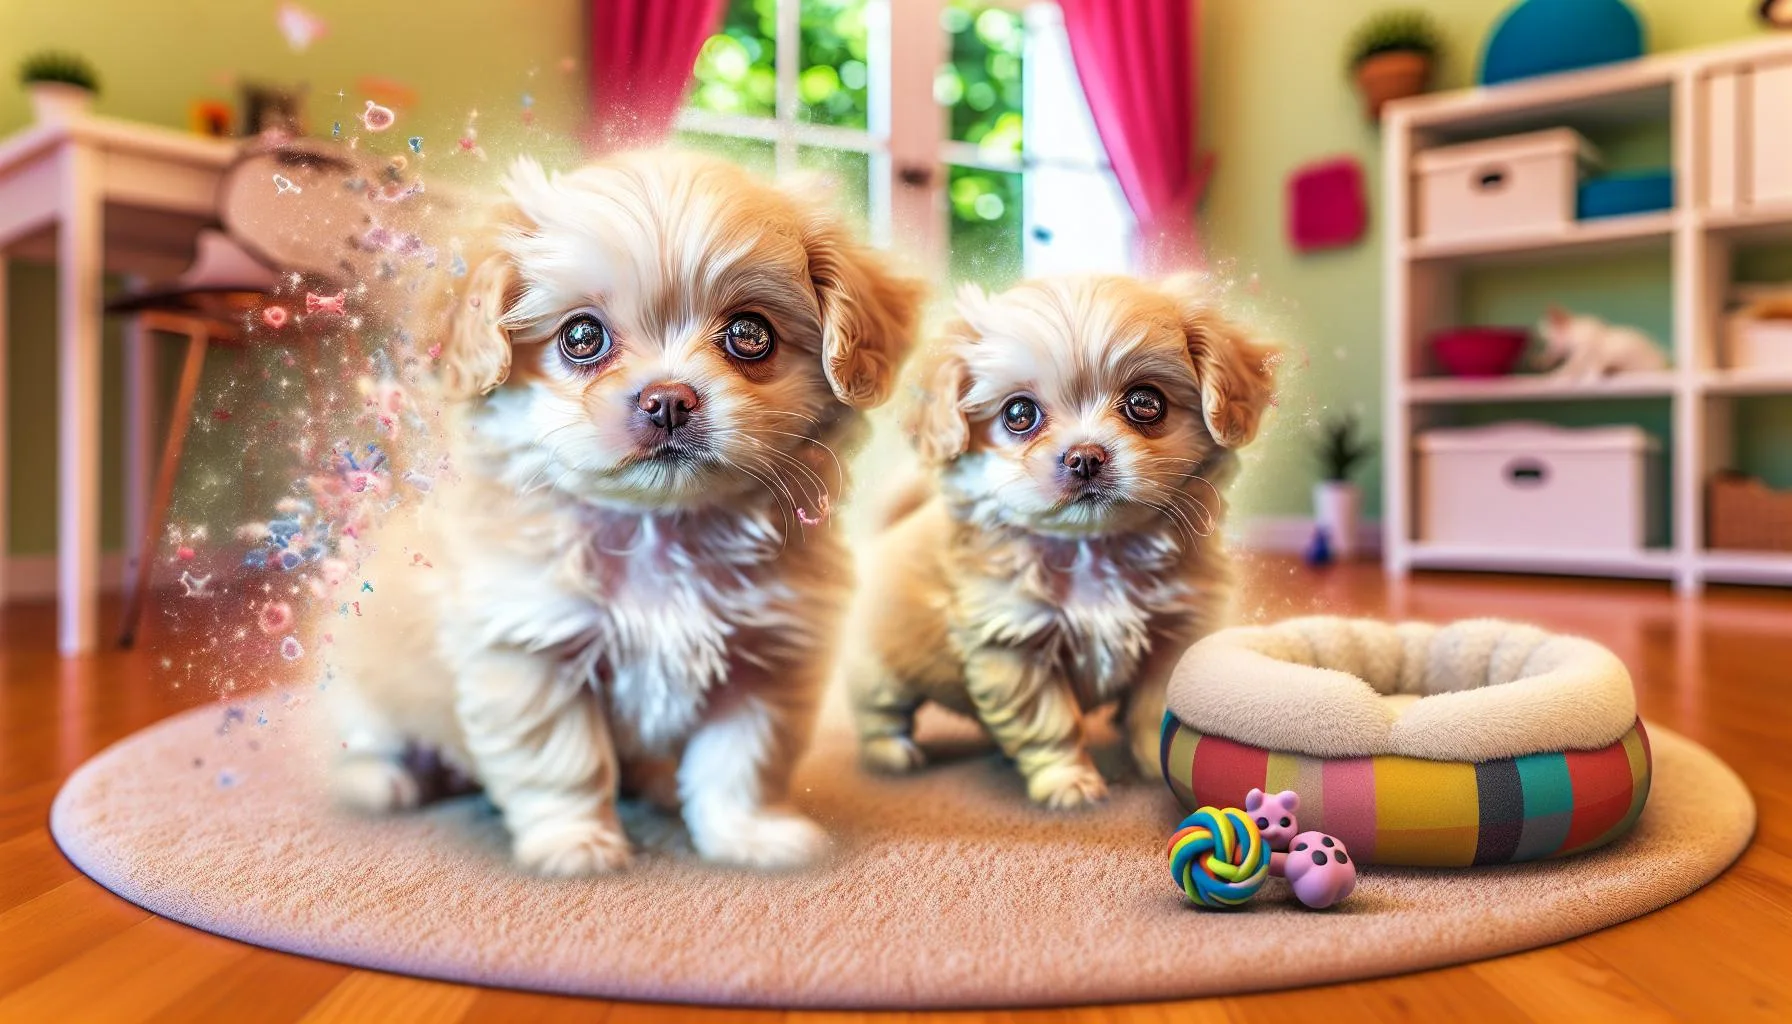  maltese mixed with chihuahua puppies Physical Characteristics of Malchi Puppies